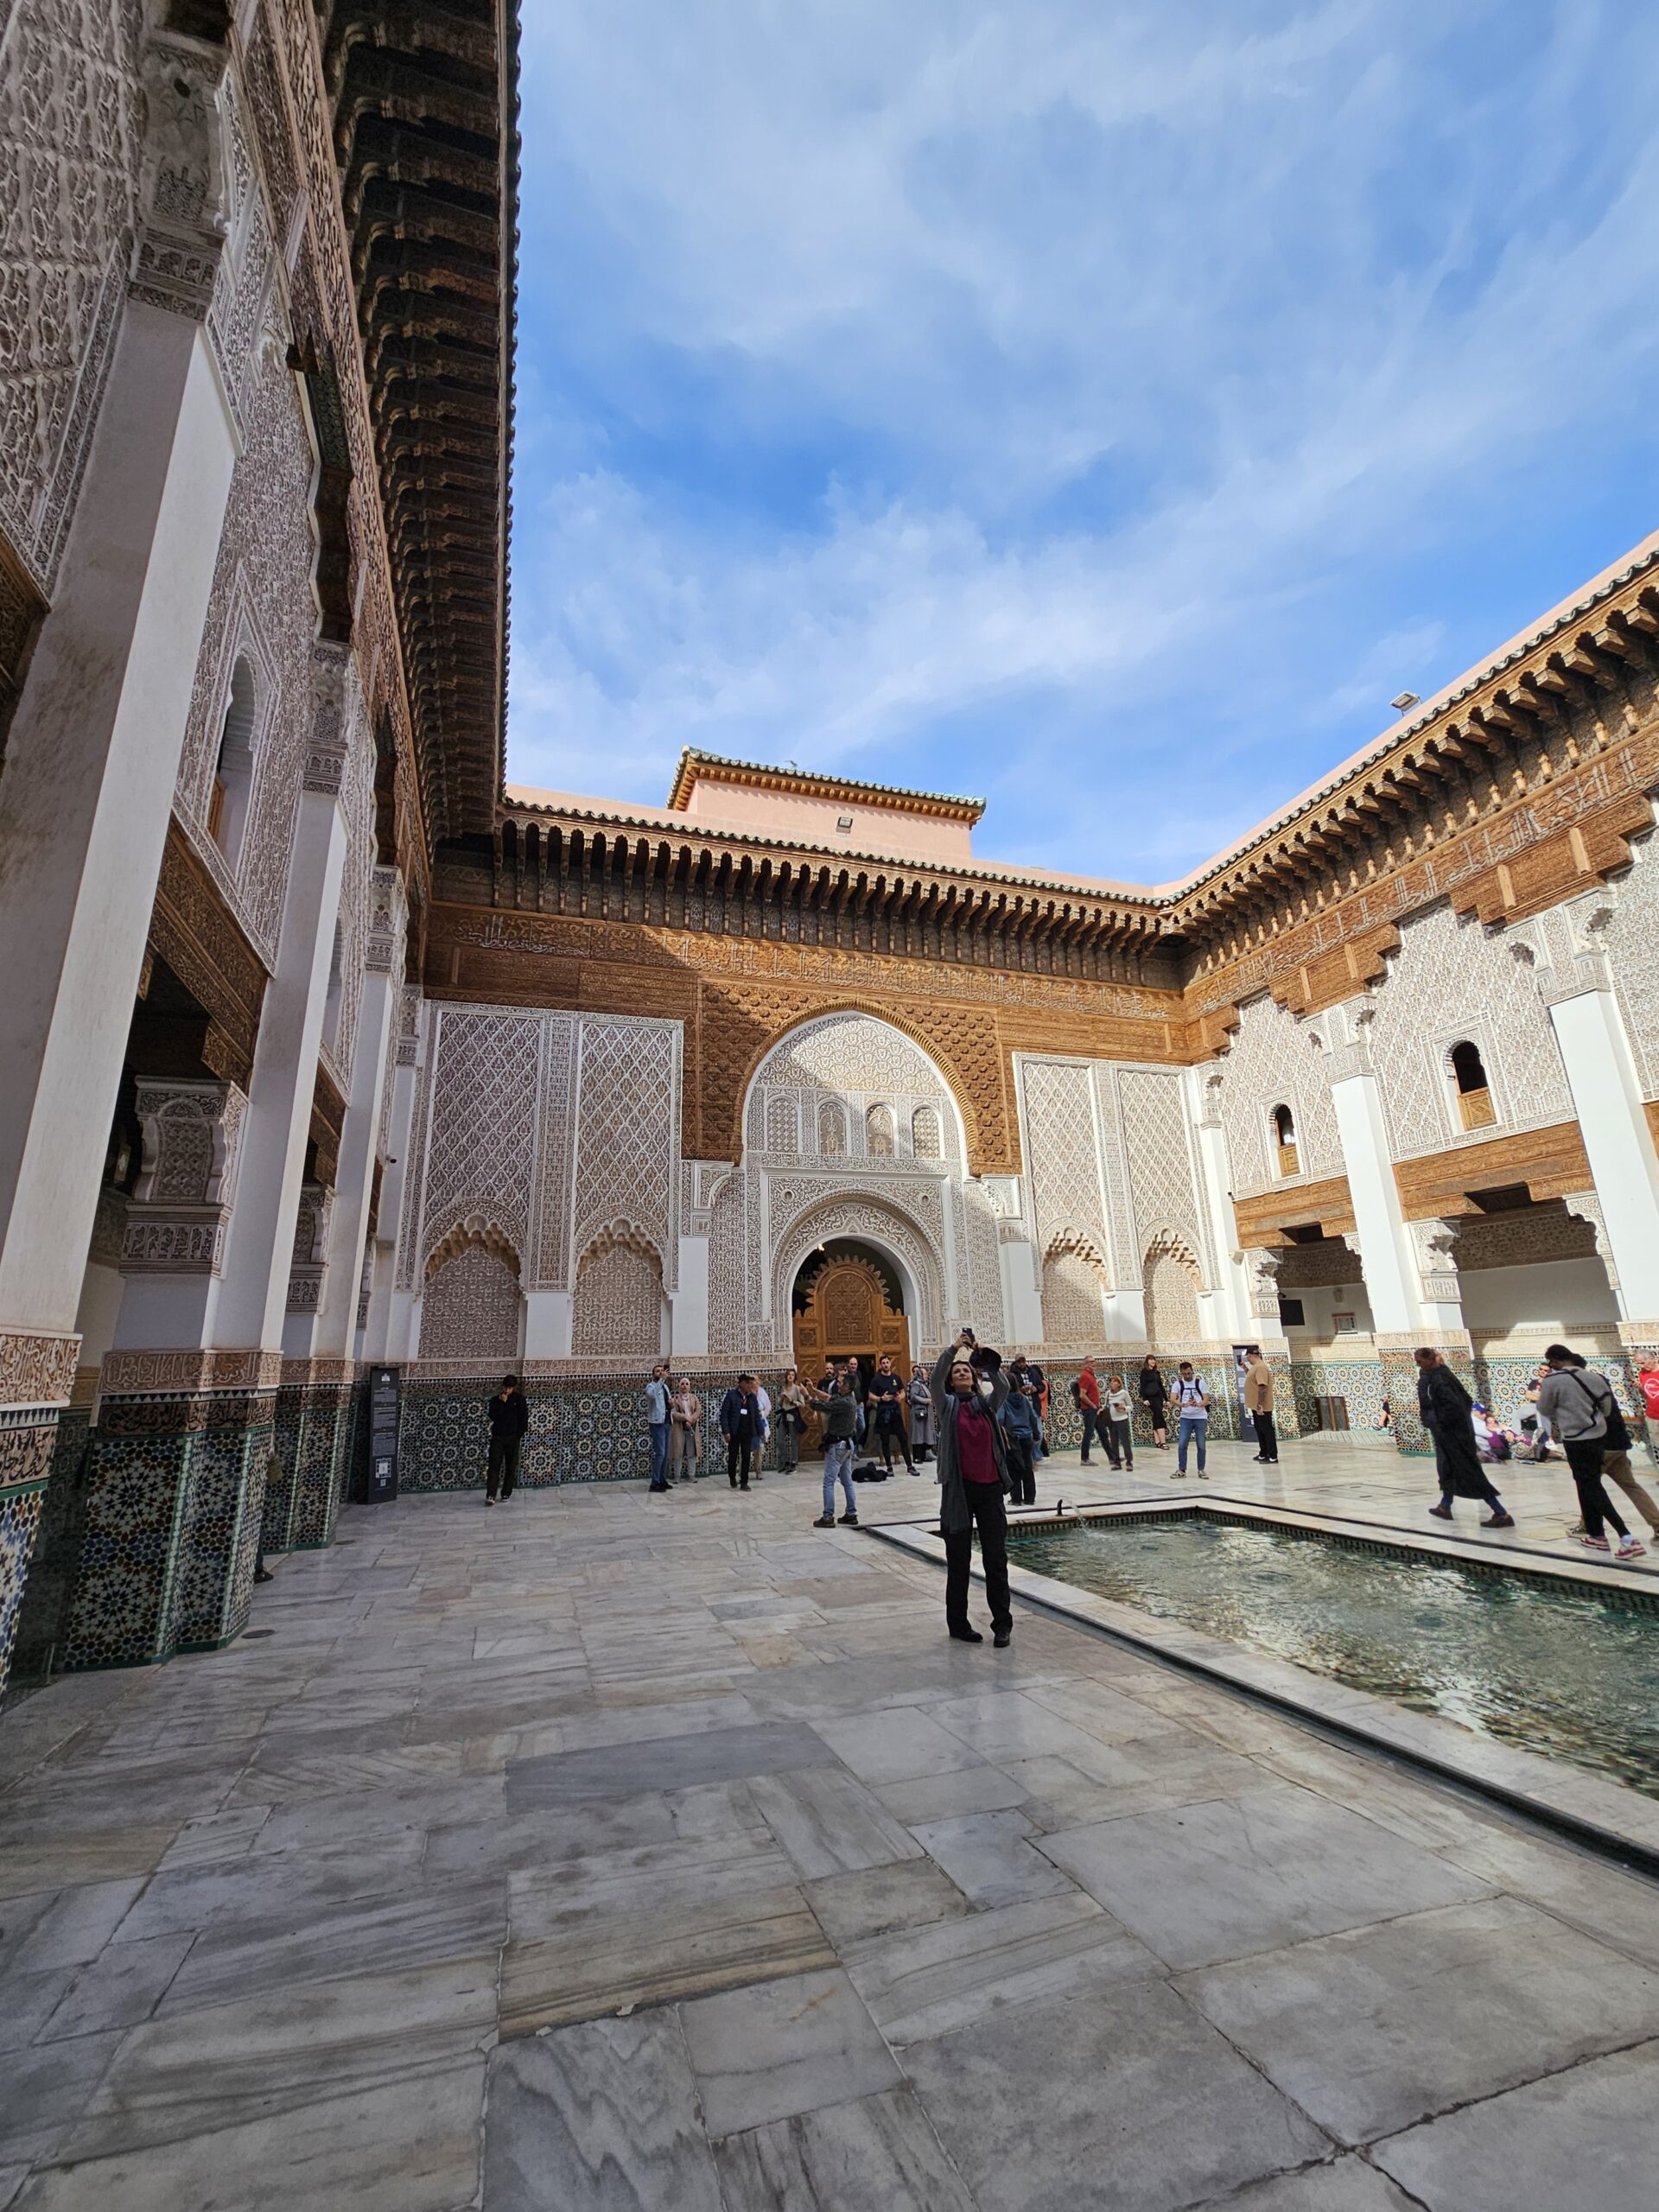 A central courtyard (riad) at Ben Youssef Madrasa, Marrakesh. Image by 360onhistory.com